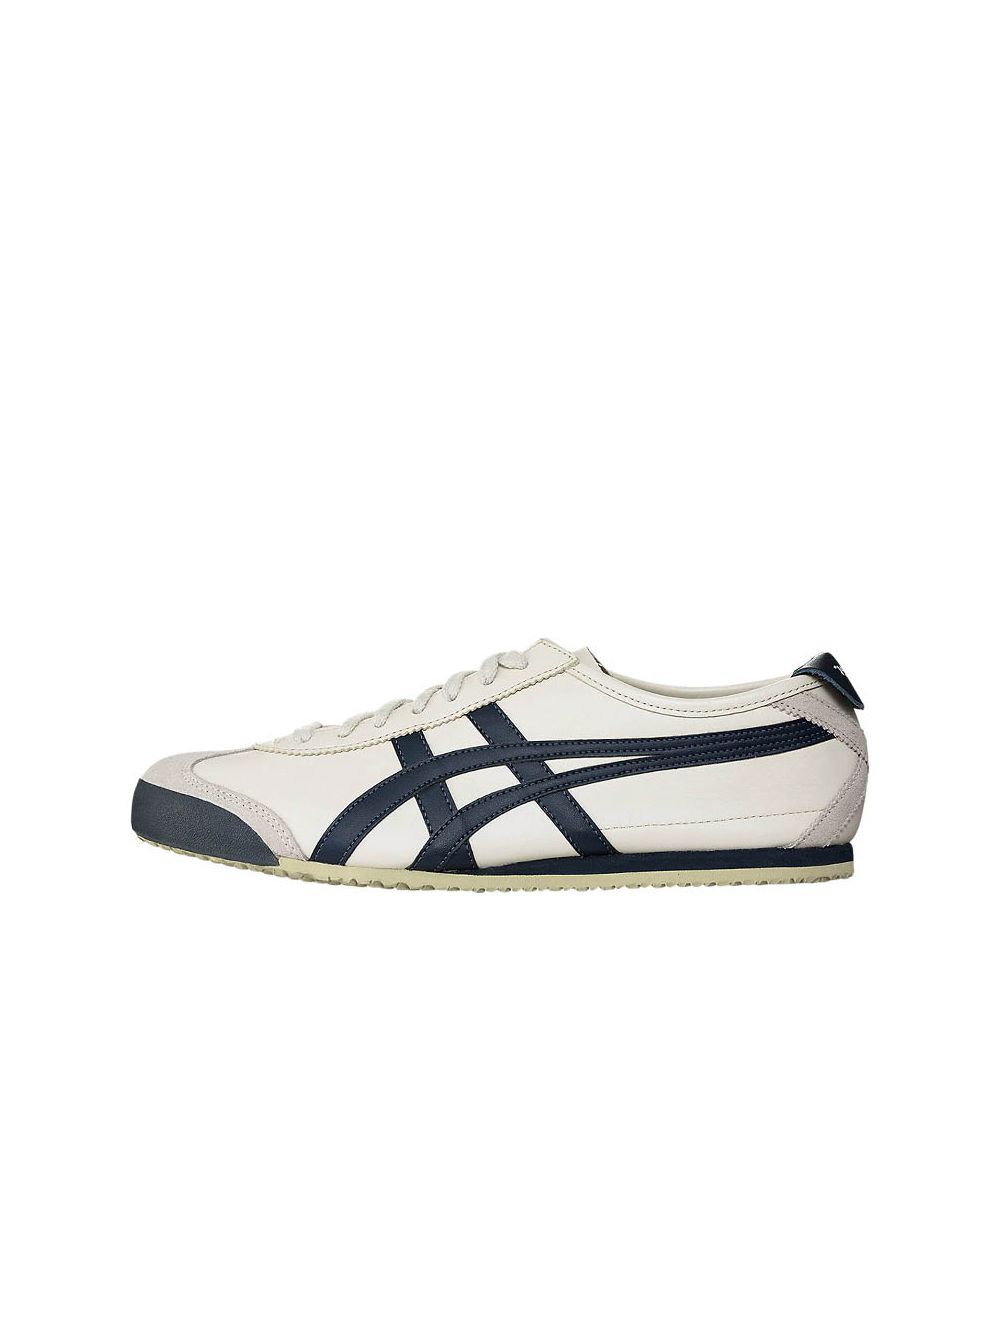 Buy Onitsuka Tiger Mexico 66 Youth Birch India Ink Latte | Studio 88